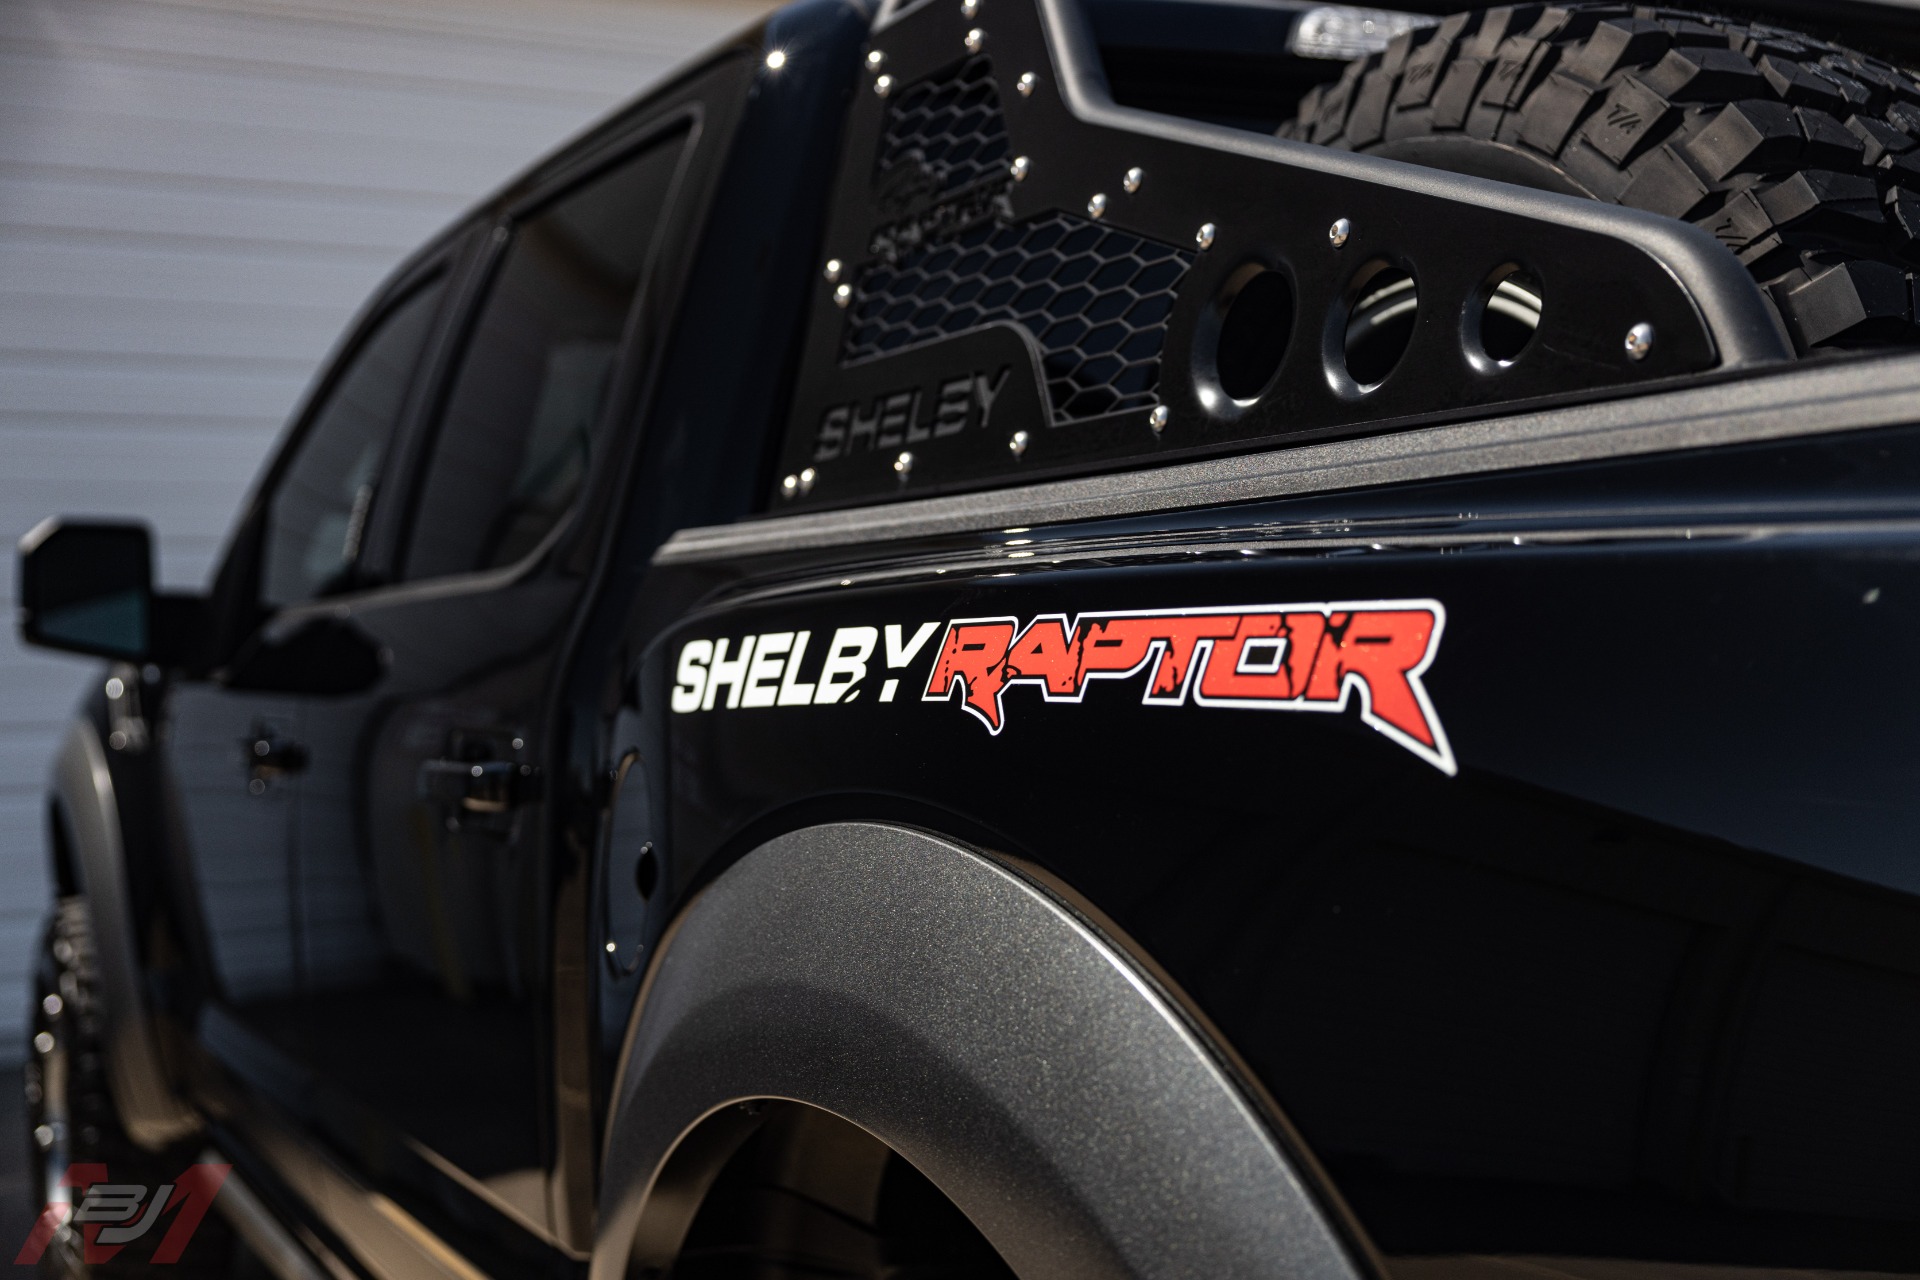 Used-2018-Ford-F-150-Shelby-Baja-Raptor